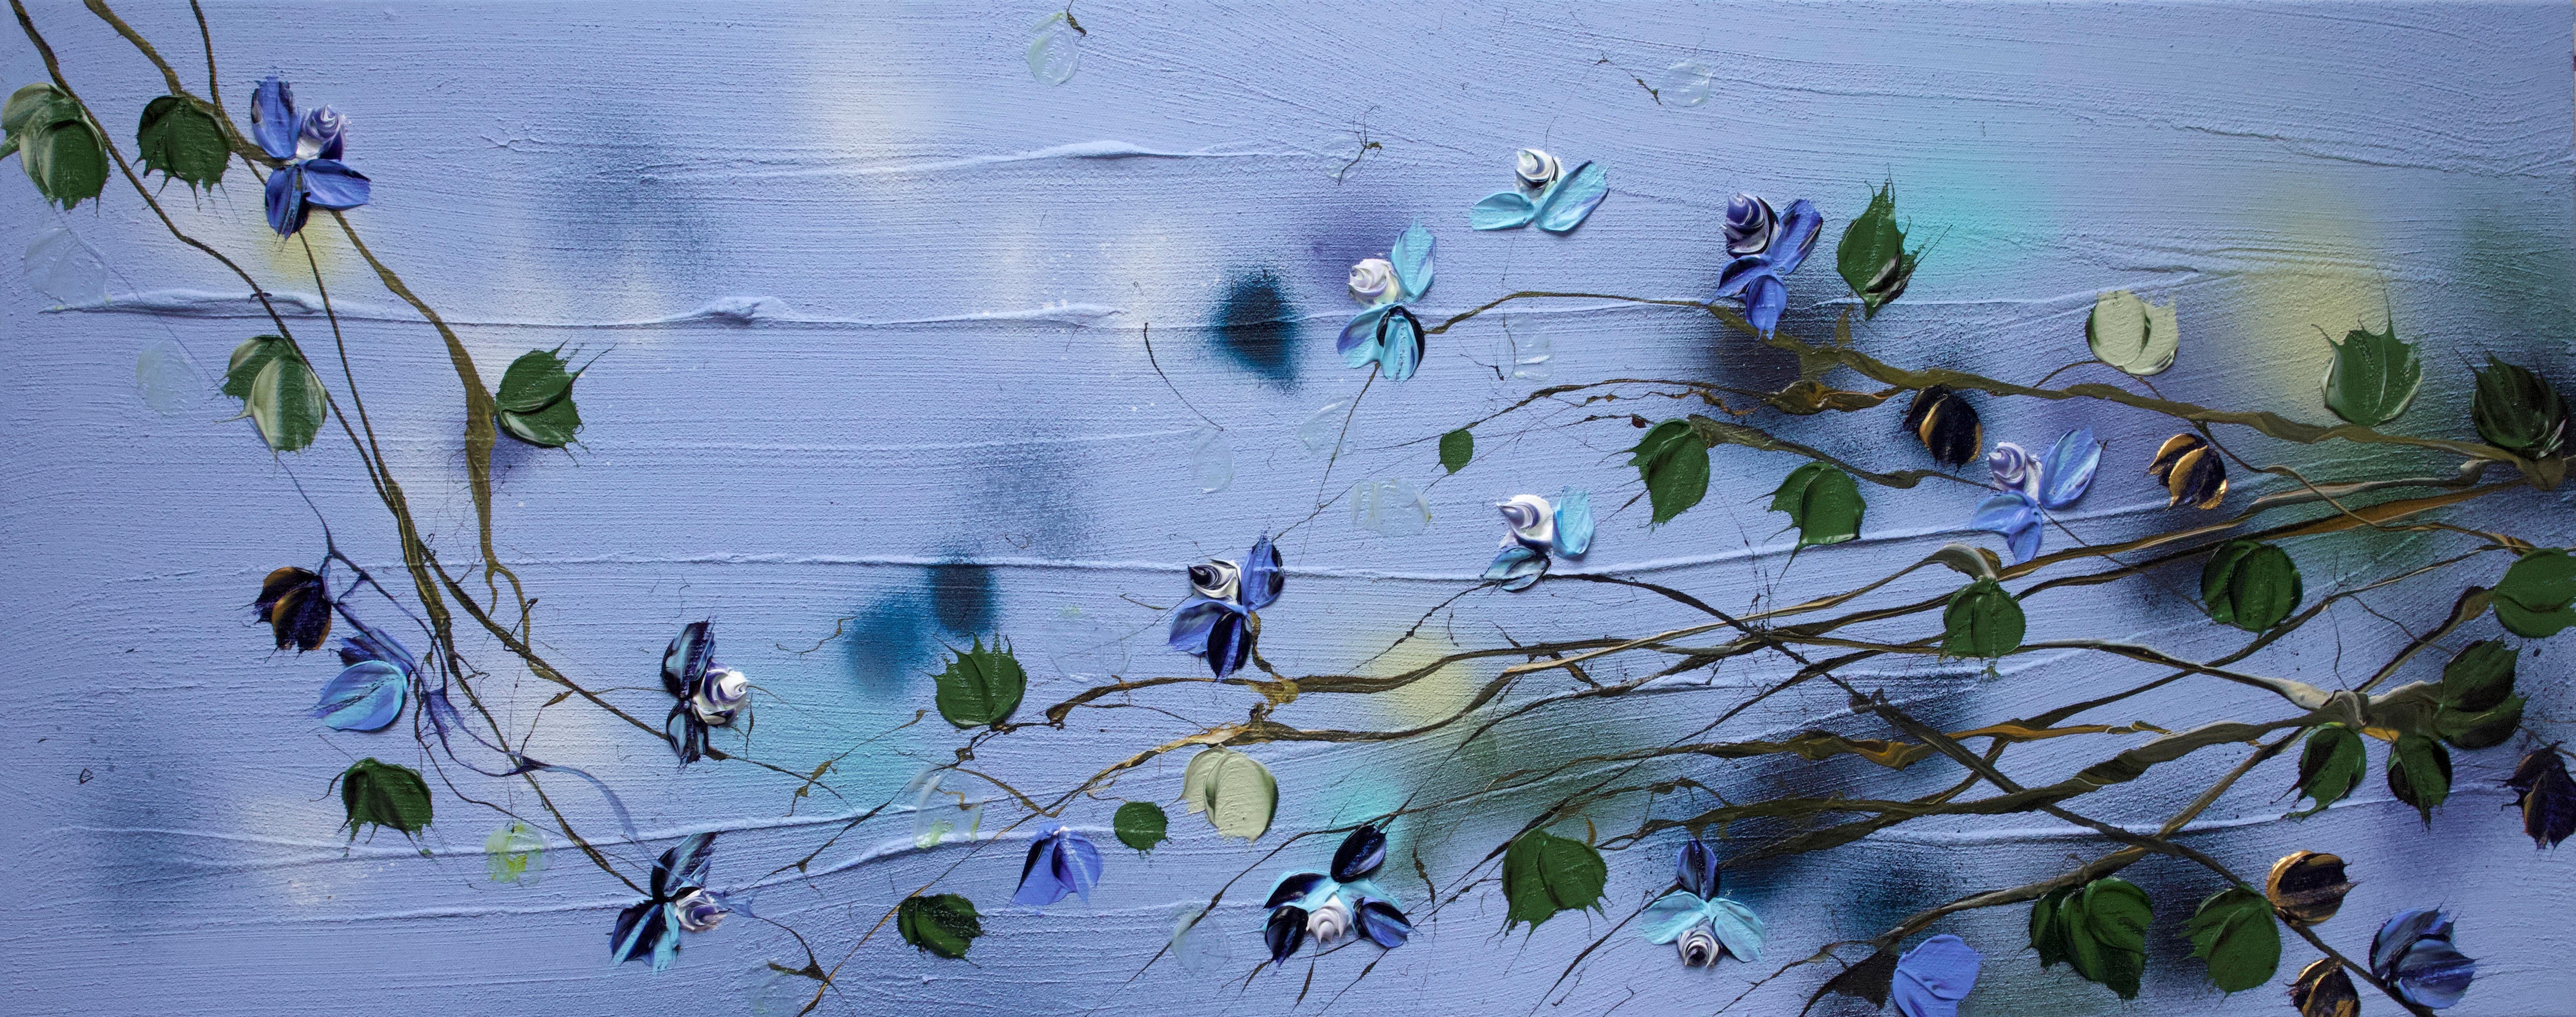 Anastassia Skopp Abstract Painting - "Blue Spring" floral textured painting on canvas